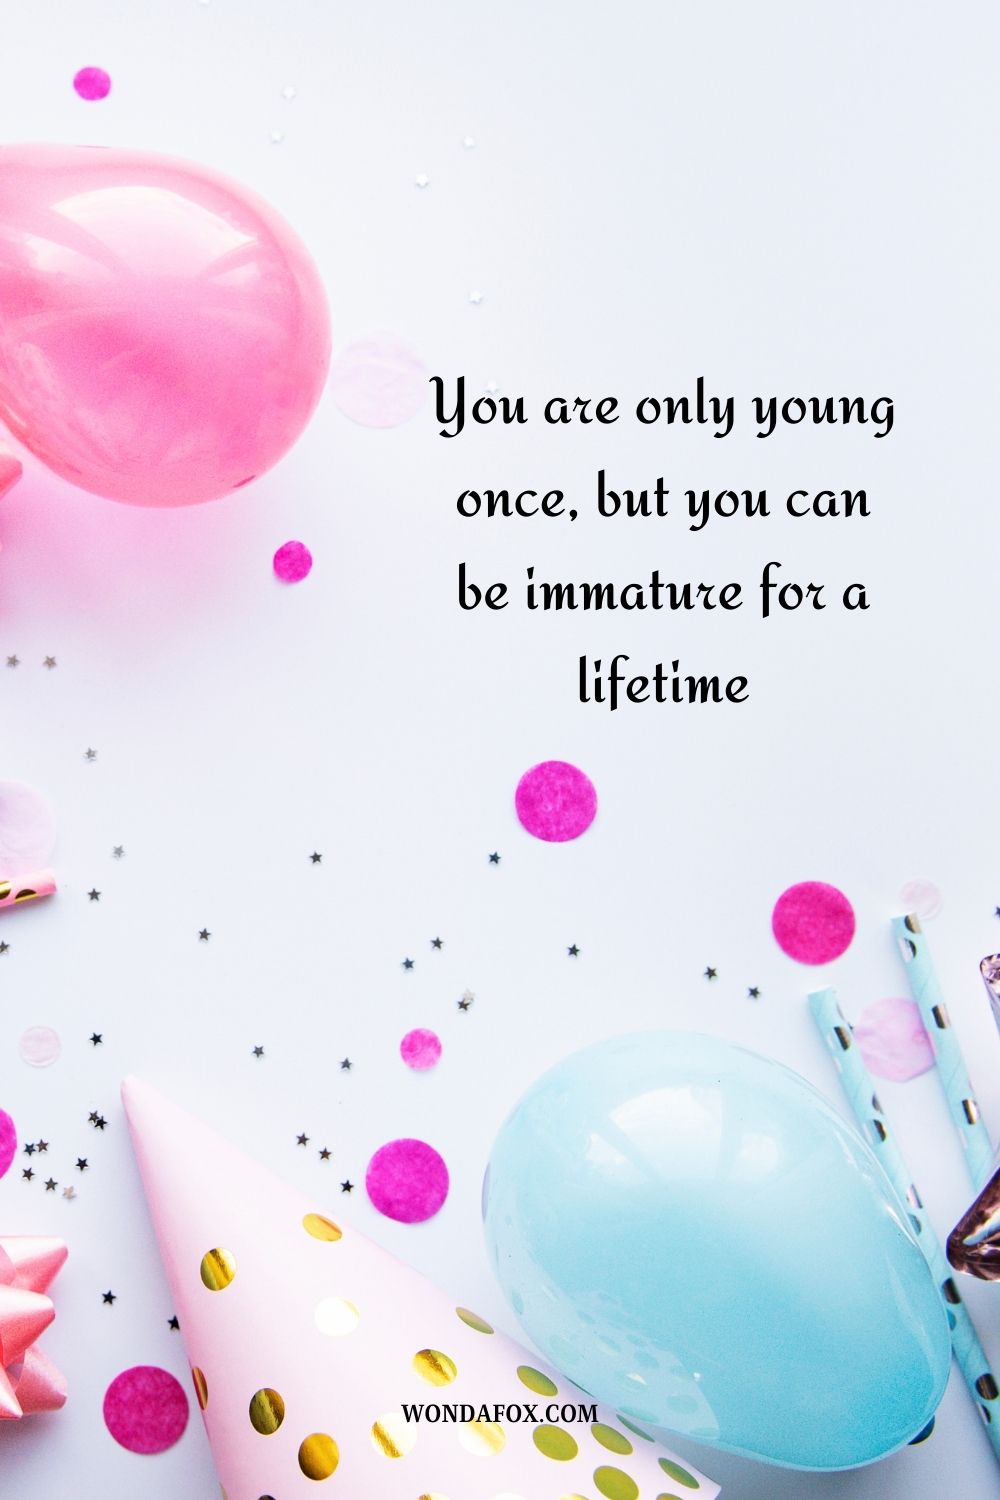 “You are only young once, but you can be immature for a lifetime. Happy birthday!”